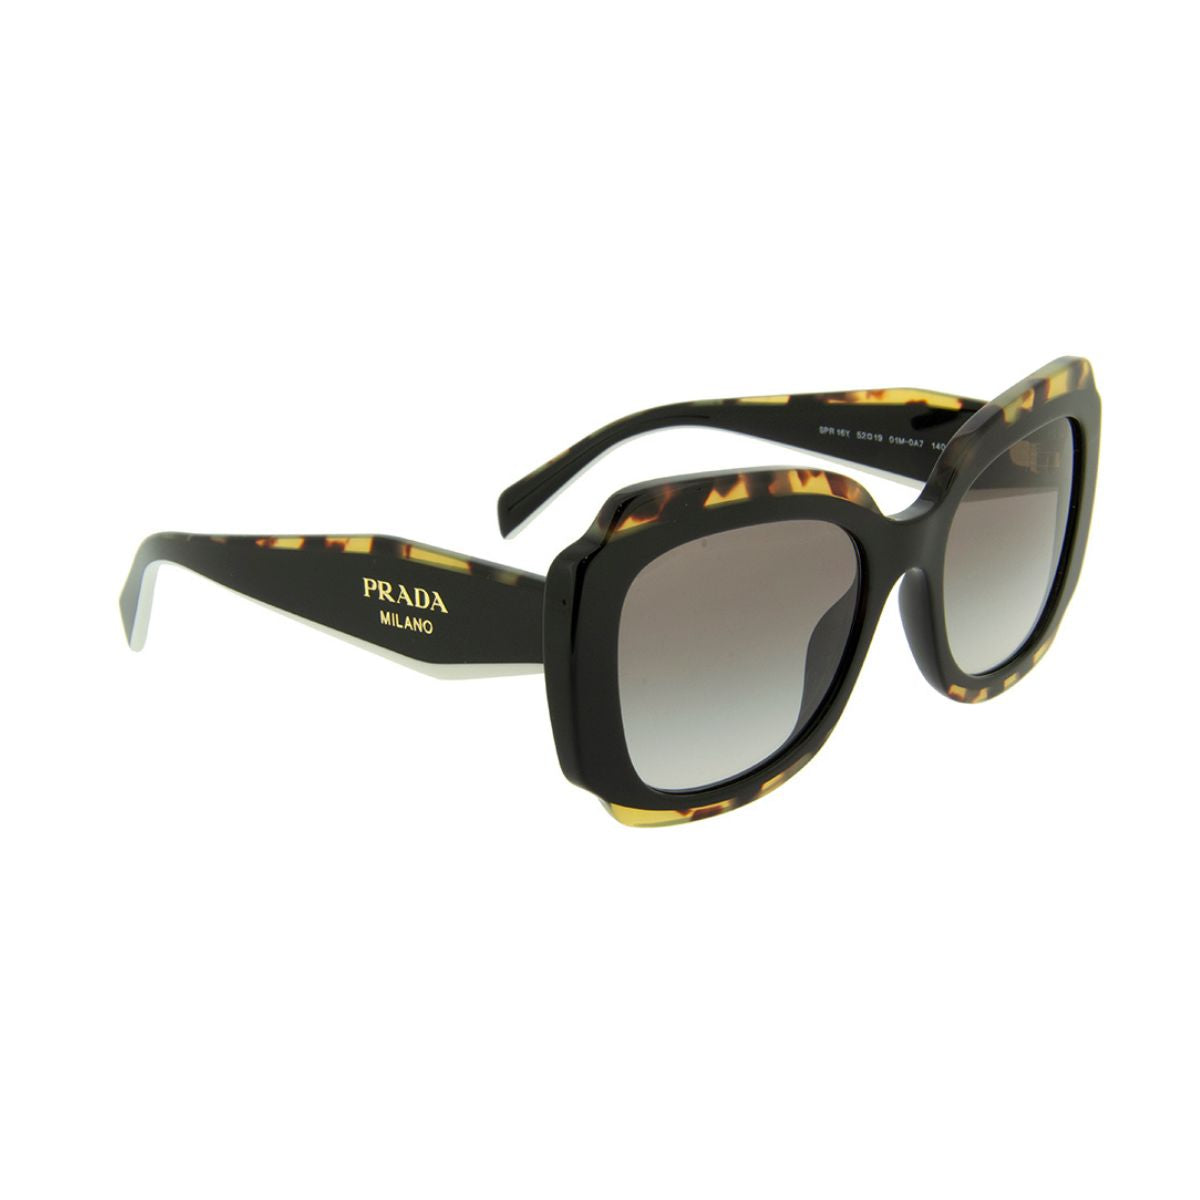 "Explore the latest Prada SPR16Y 01M-OA7 sunglasses for women at Optorium, showcasing a stylish and high-quality butterfly shape design in cool grey, perfect for fashion-forward females."